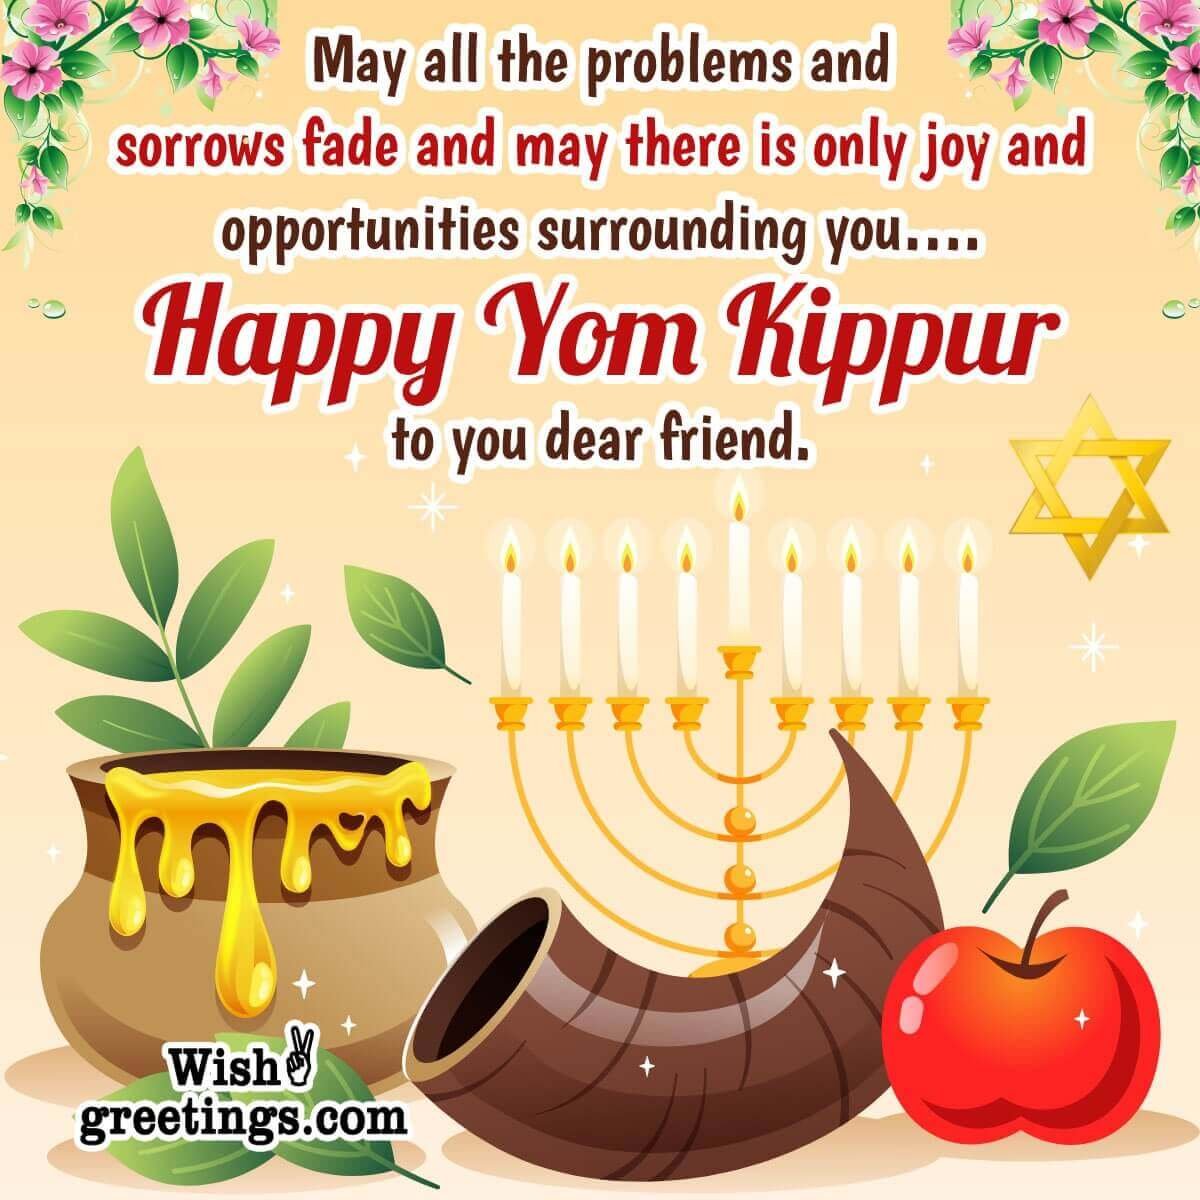 Yom Kippur Wishes Messages